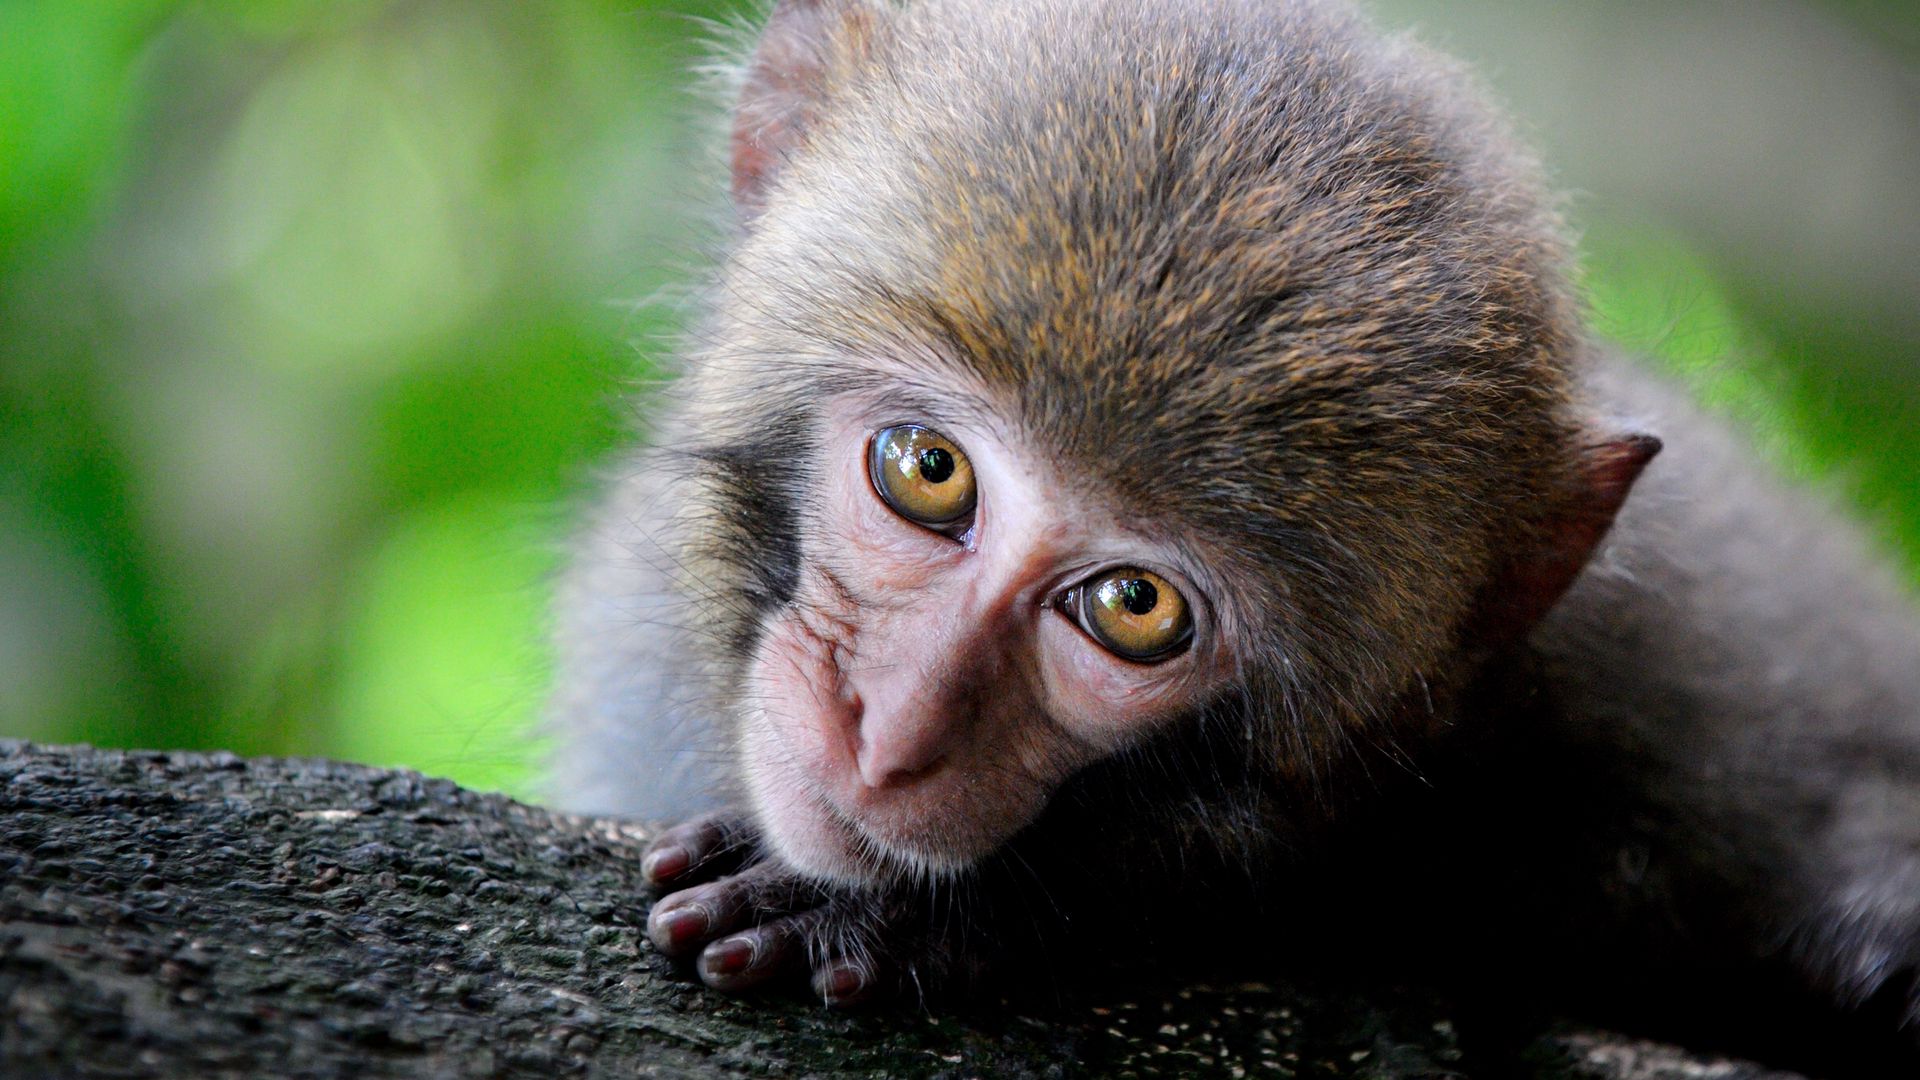 Free download Monkey Wallpapers on [1080x1920] for your Desktop, Mobile &  Tablet | Explore 16+ Monkey HD Wallpapers | Baby Monkey Wallpaper, Monkey  Wallpapers, Monkey Wallpaper